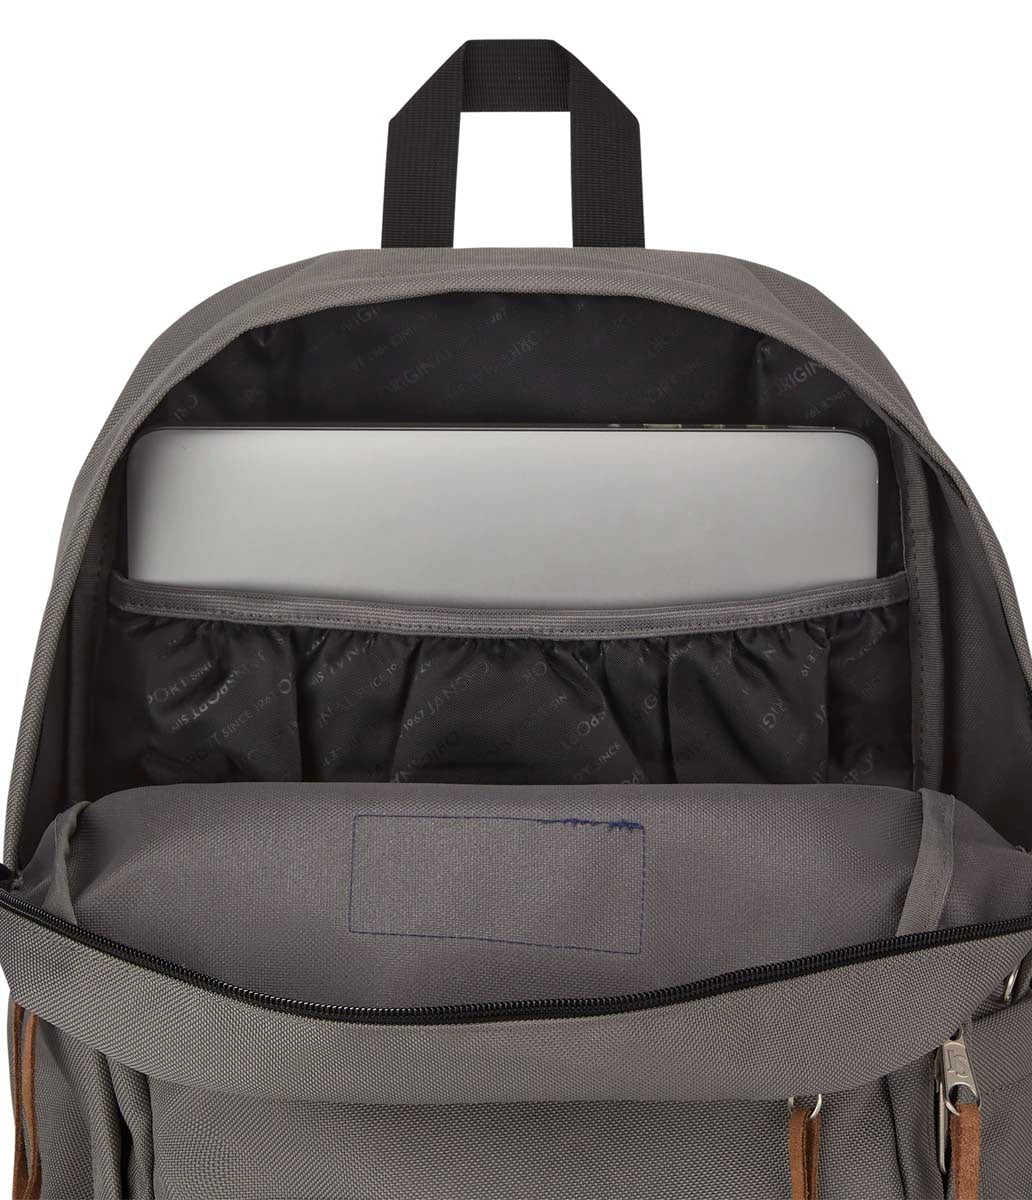 JanSport Right Pack Backpack - Graphite Grey